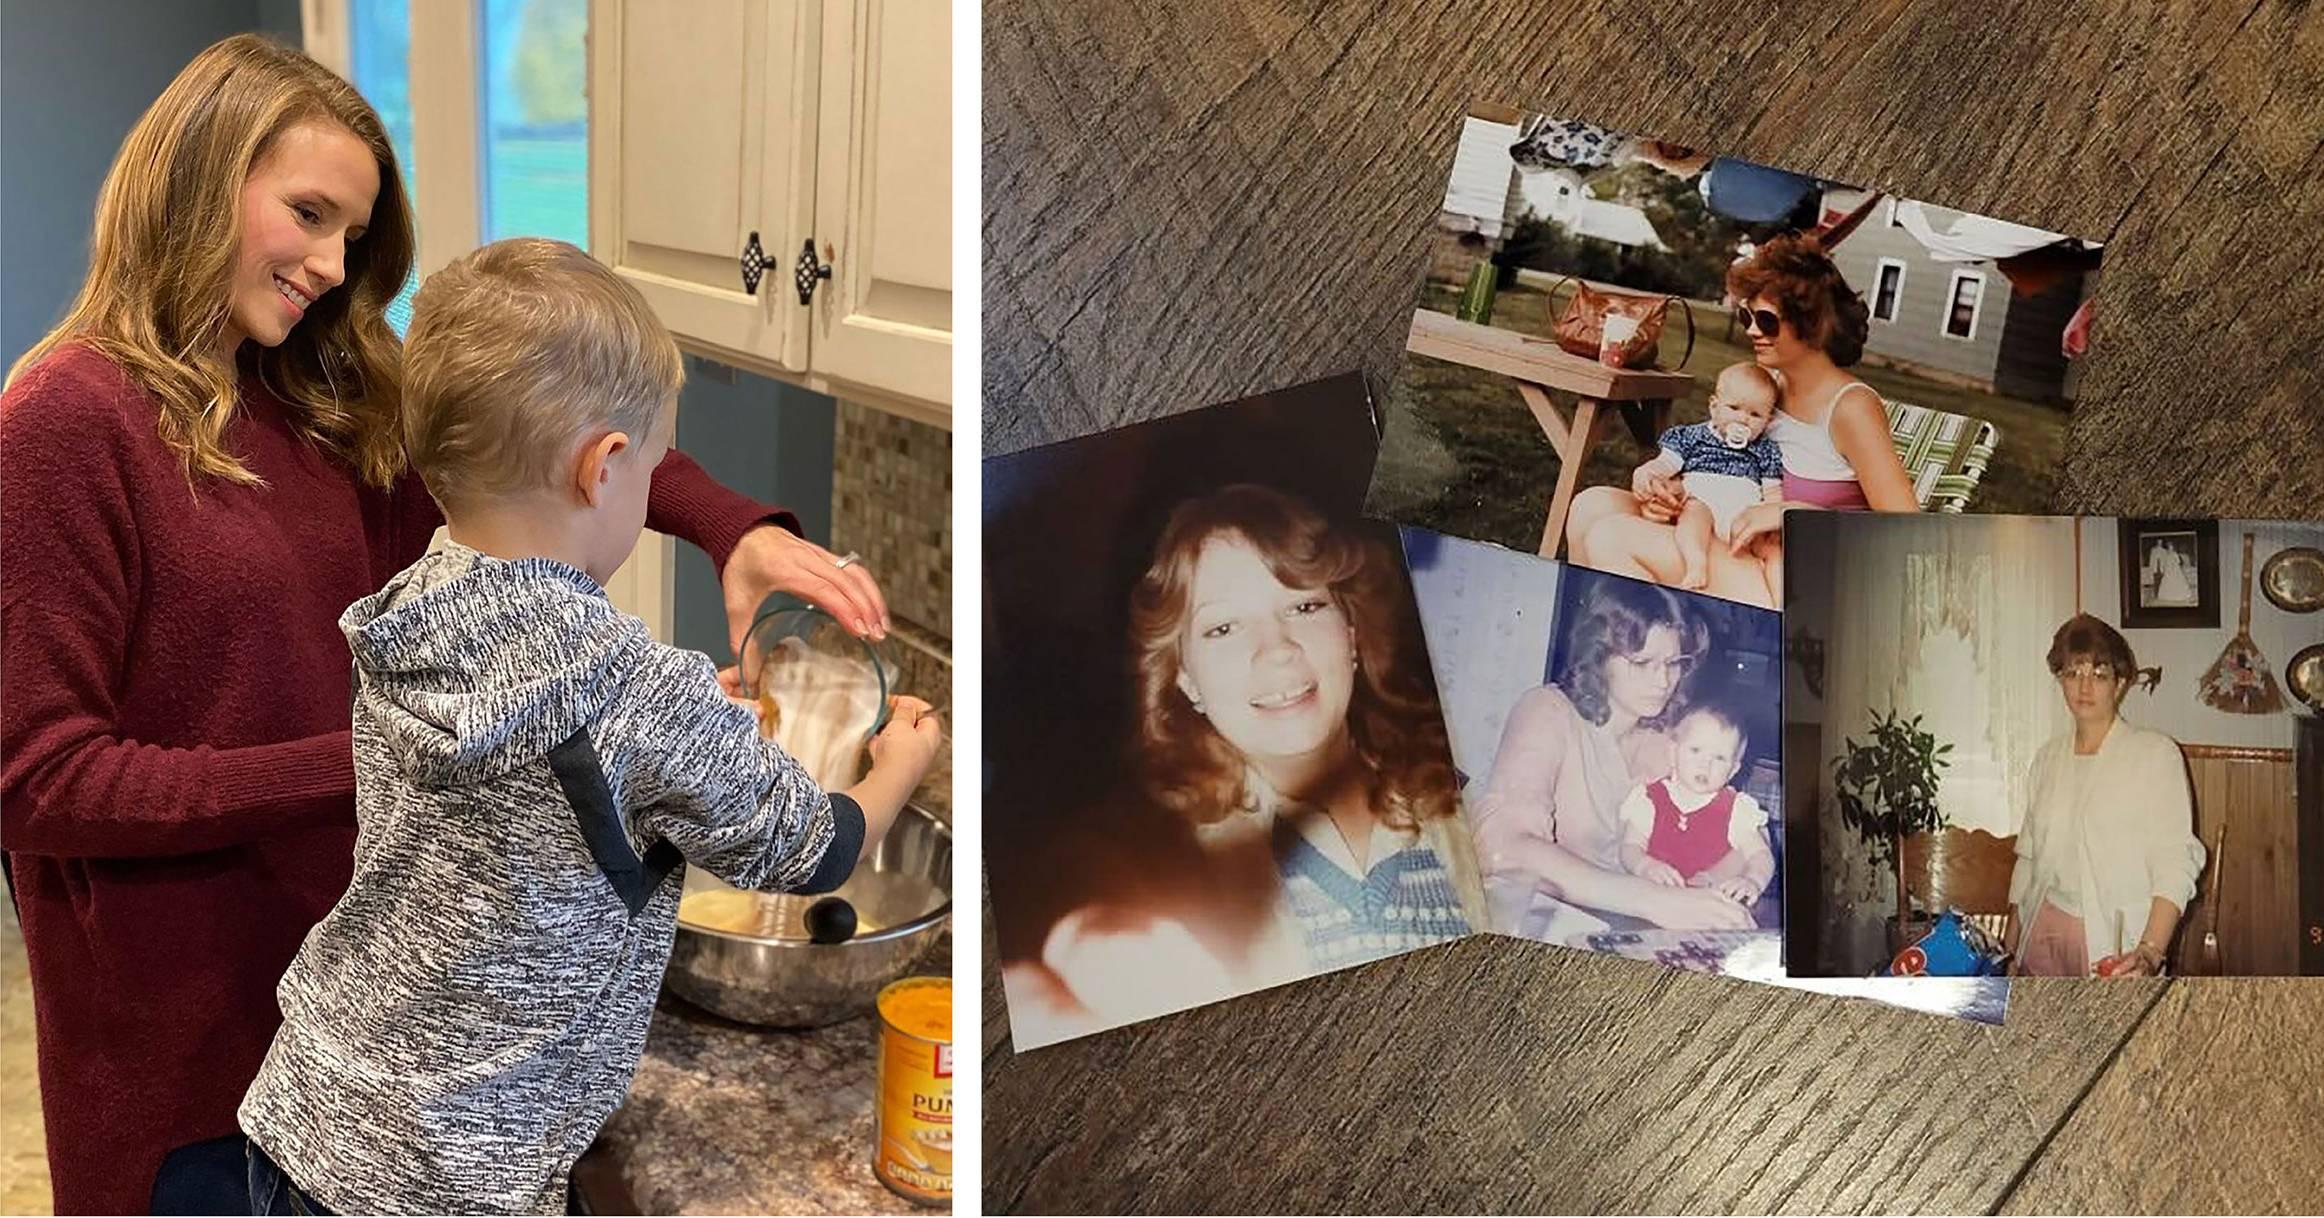 Left: Jessica Dilsaver-Sandusky and her son Calvin make pumpkin pie ahead of the Thanksgiving holiday. Right: Photos show Jessica Dilsaver-Sandusky's mother, Deb Scott, through the years. (Courtesy Jessica Dilsaver-Sandusky)